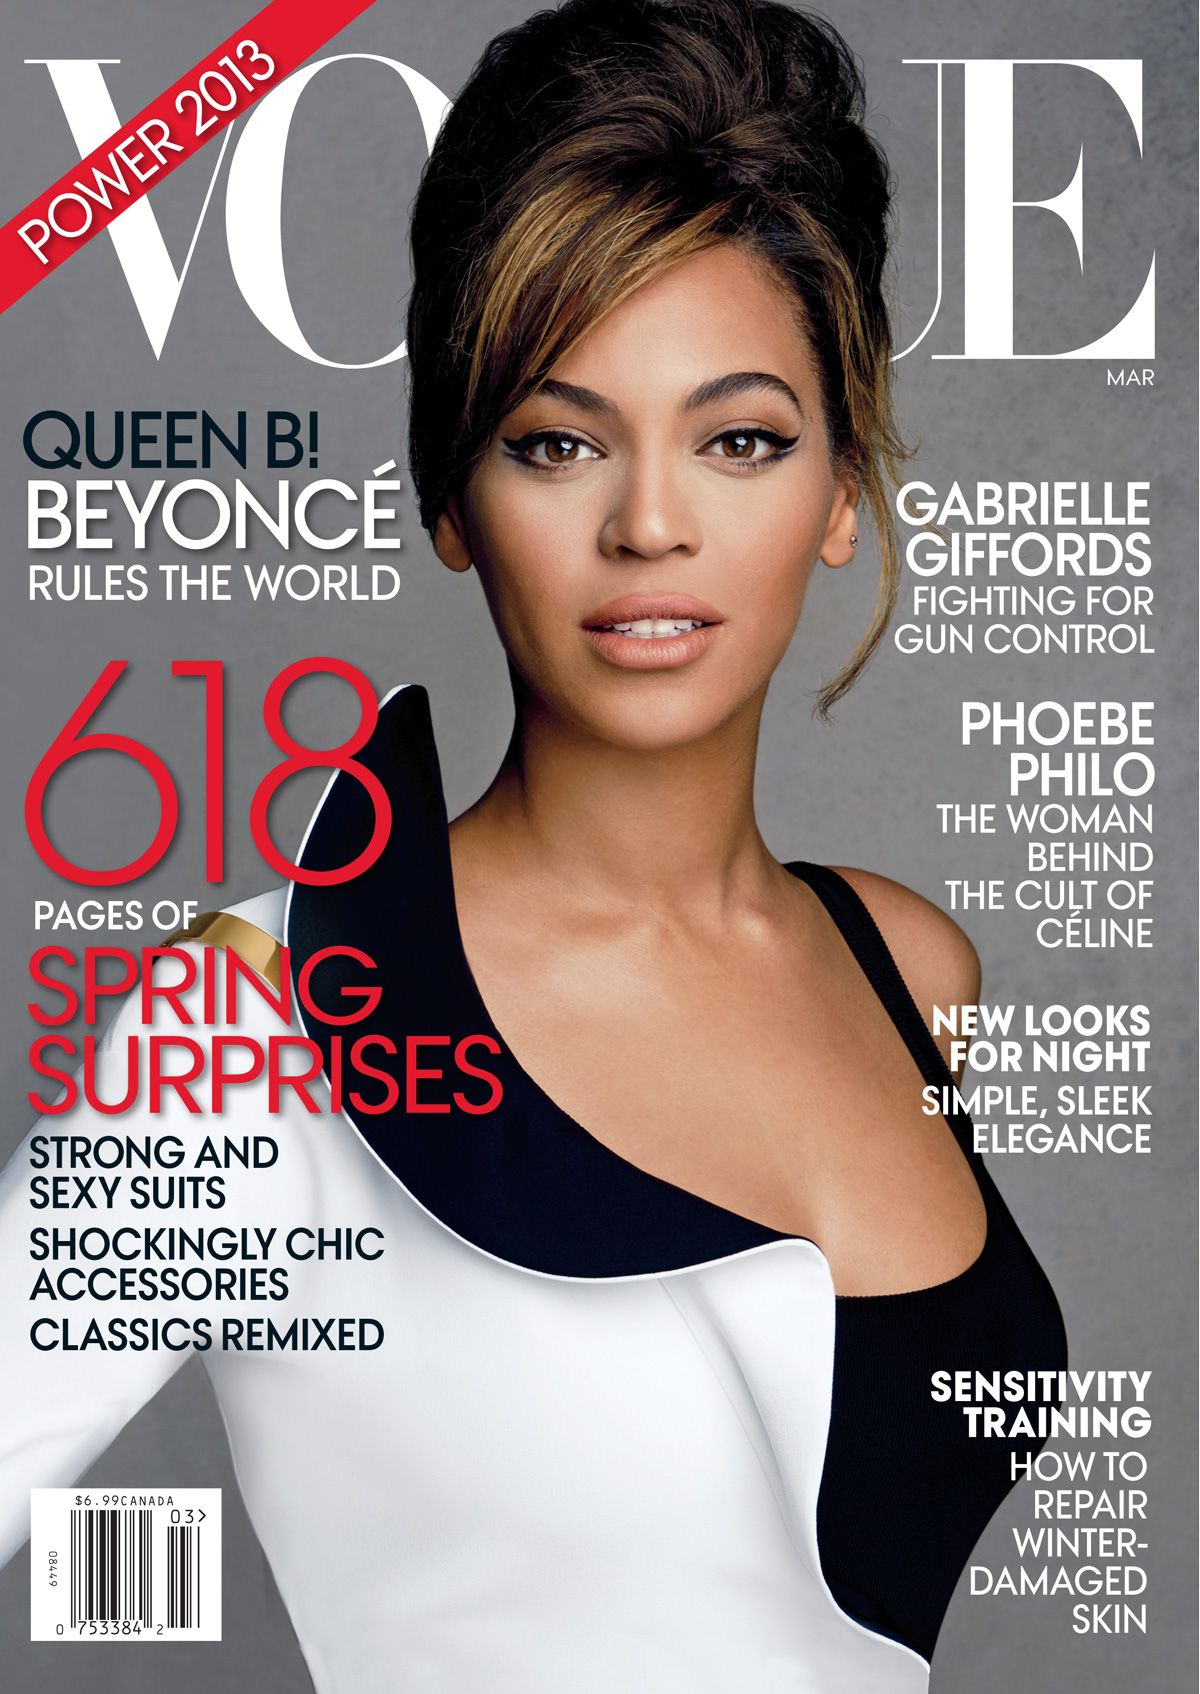 beyonce-vogue-cover-march-2013_144337662914